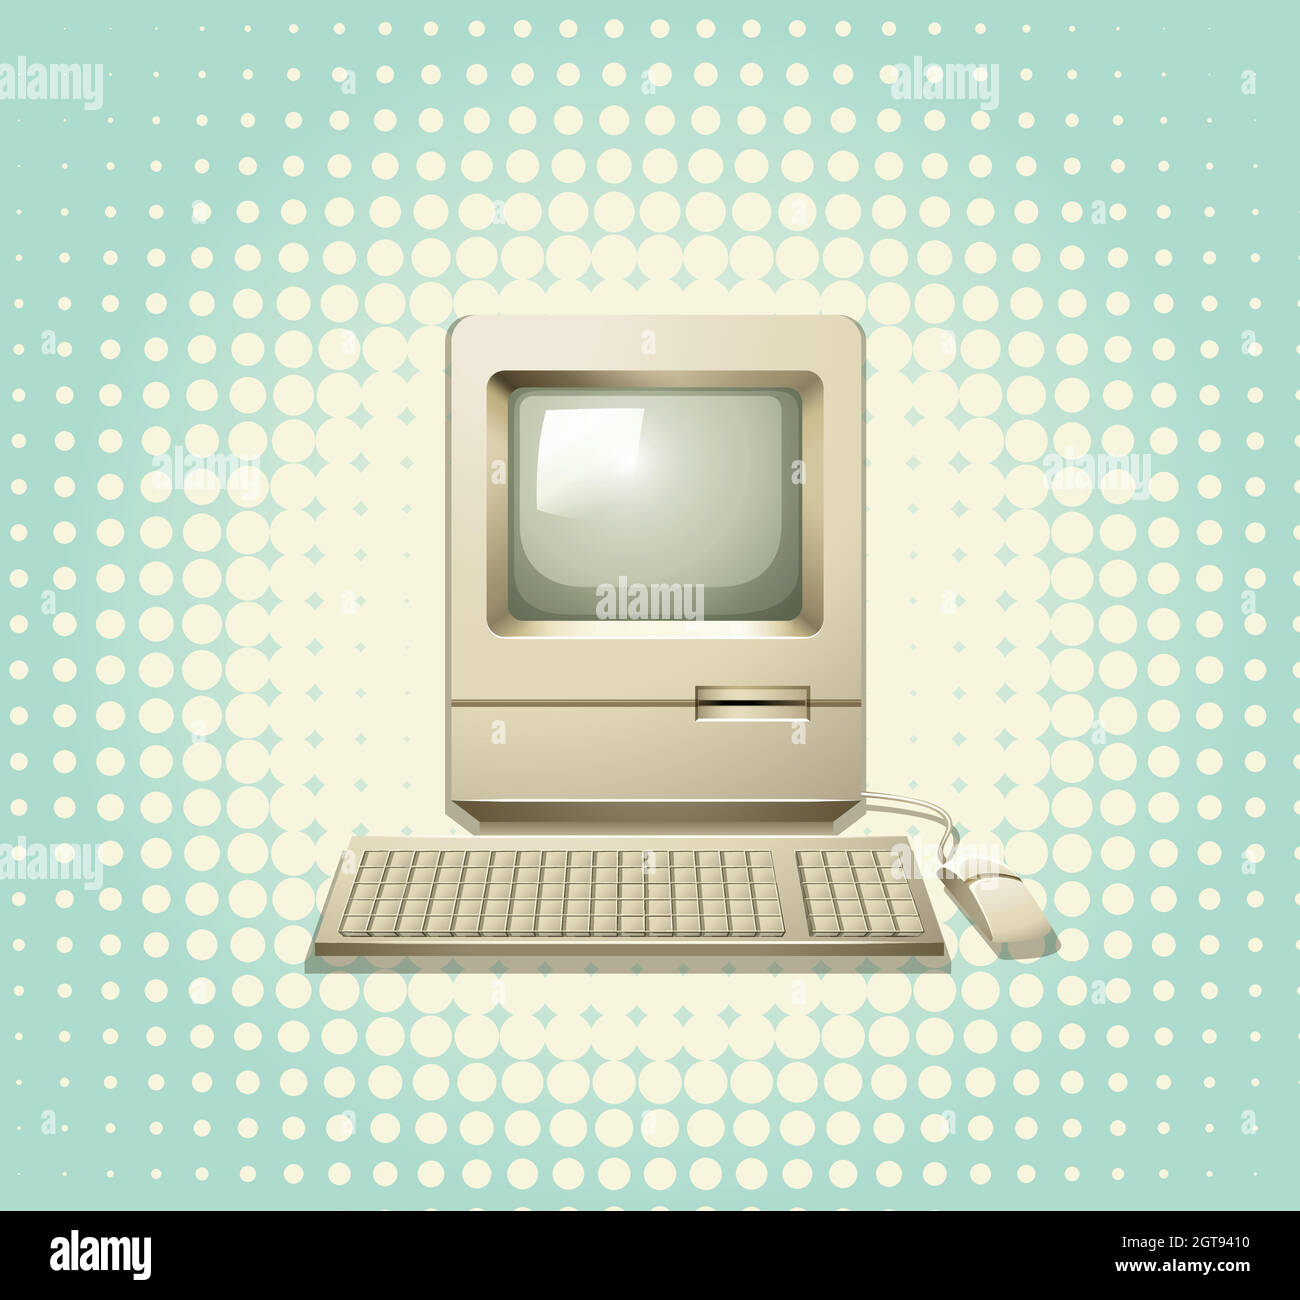 Retro computer with keyboard and monitor Stock Vector